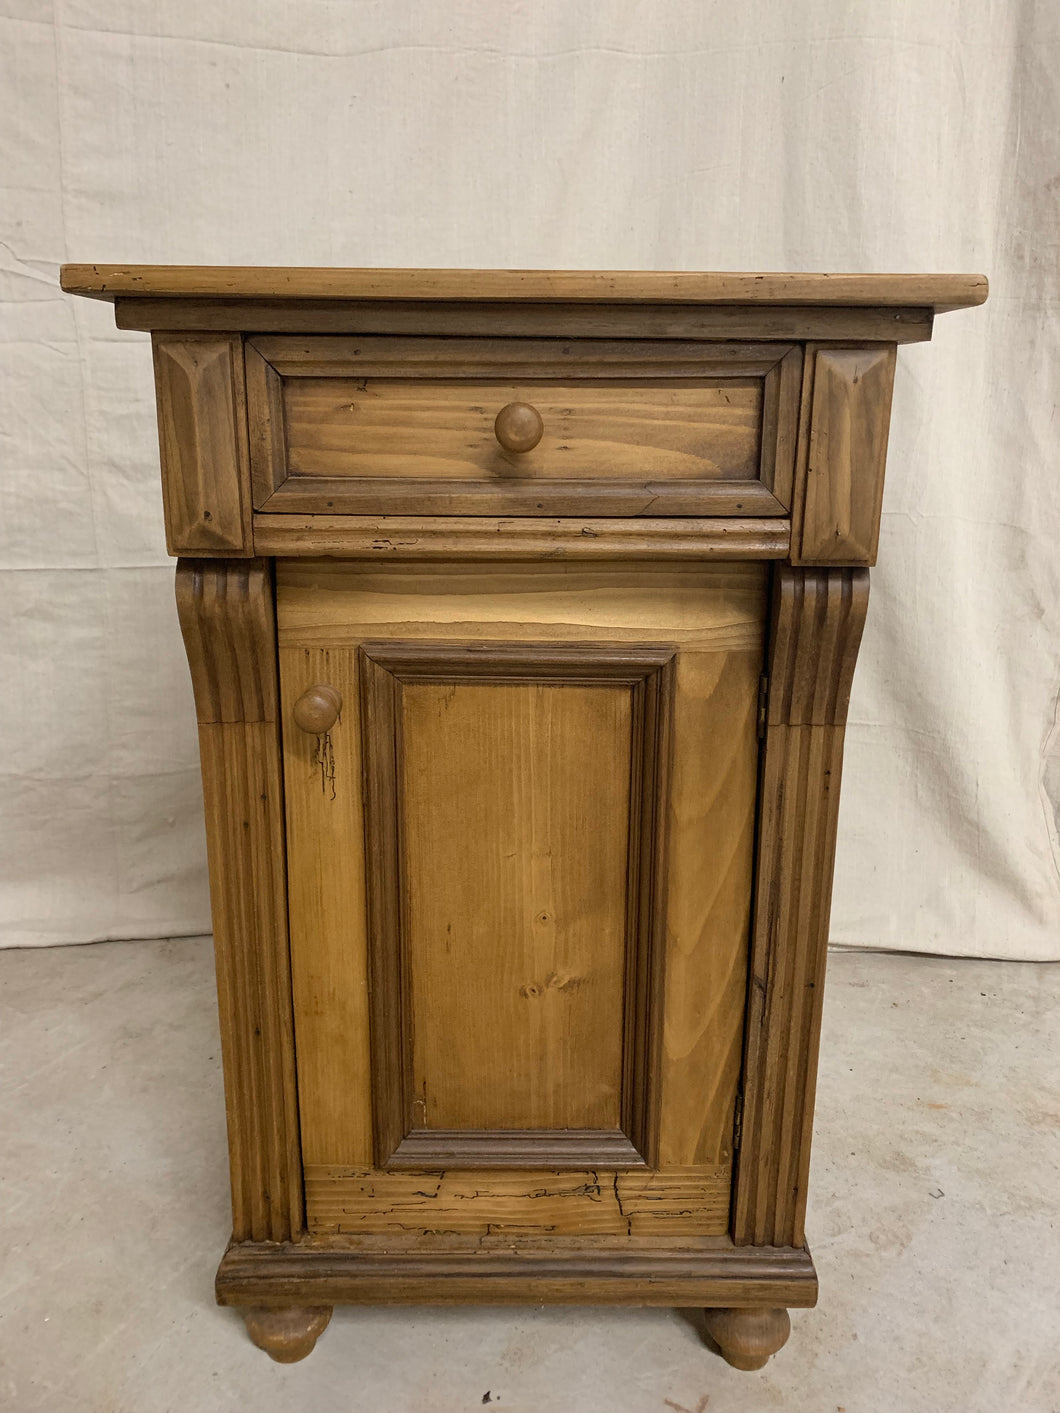 Pine Side Table/ Cabinet